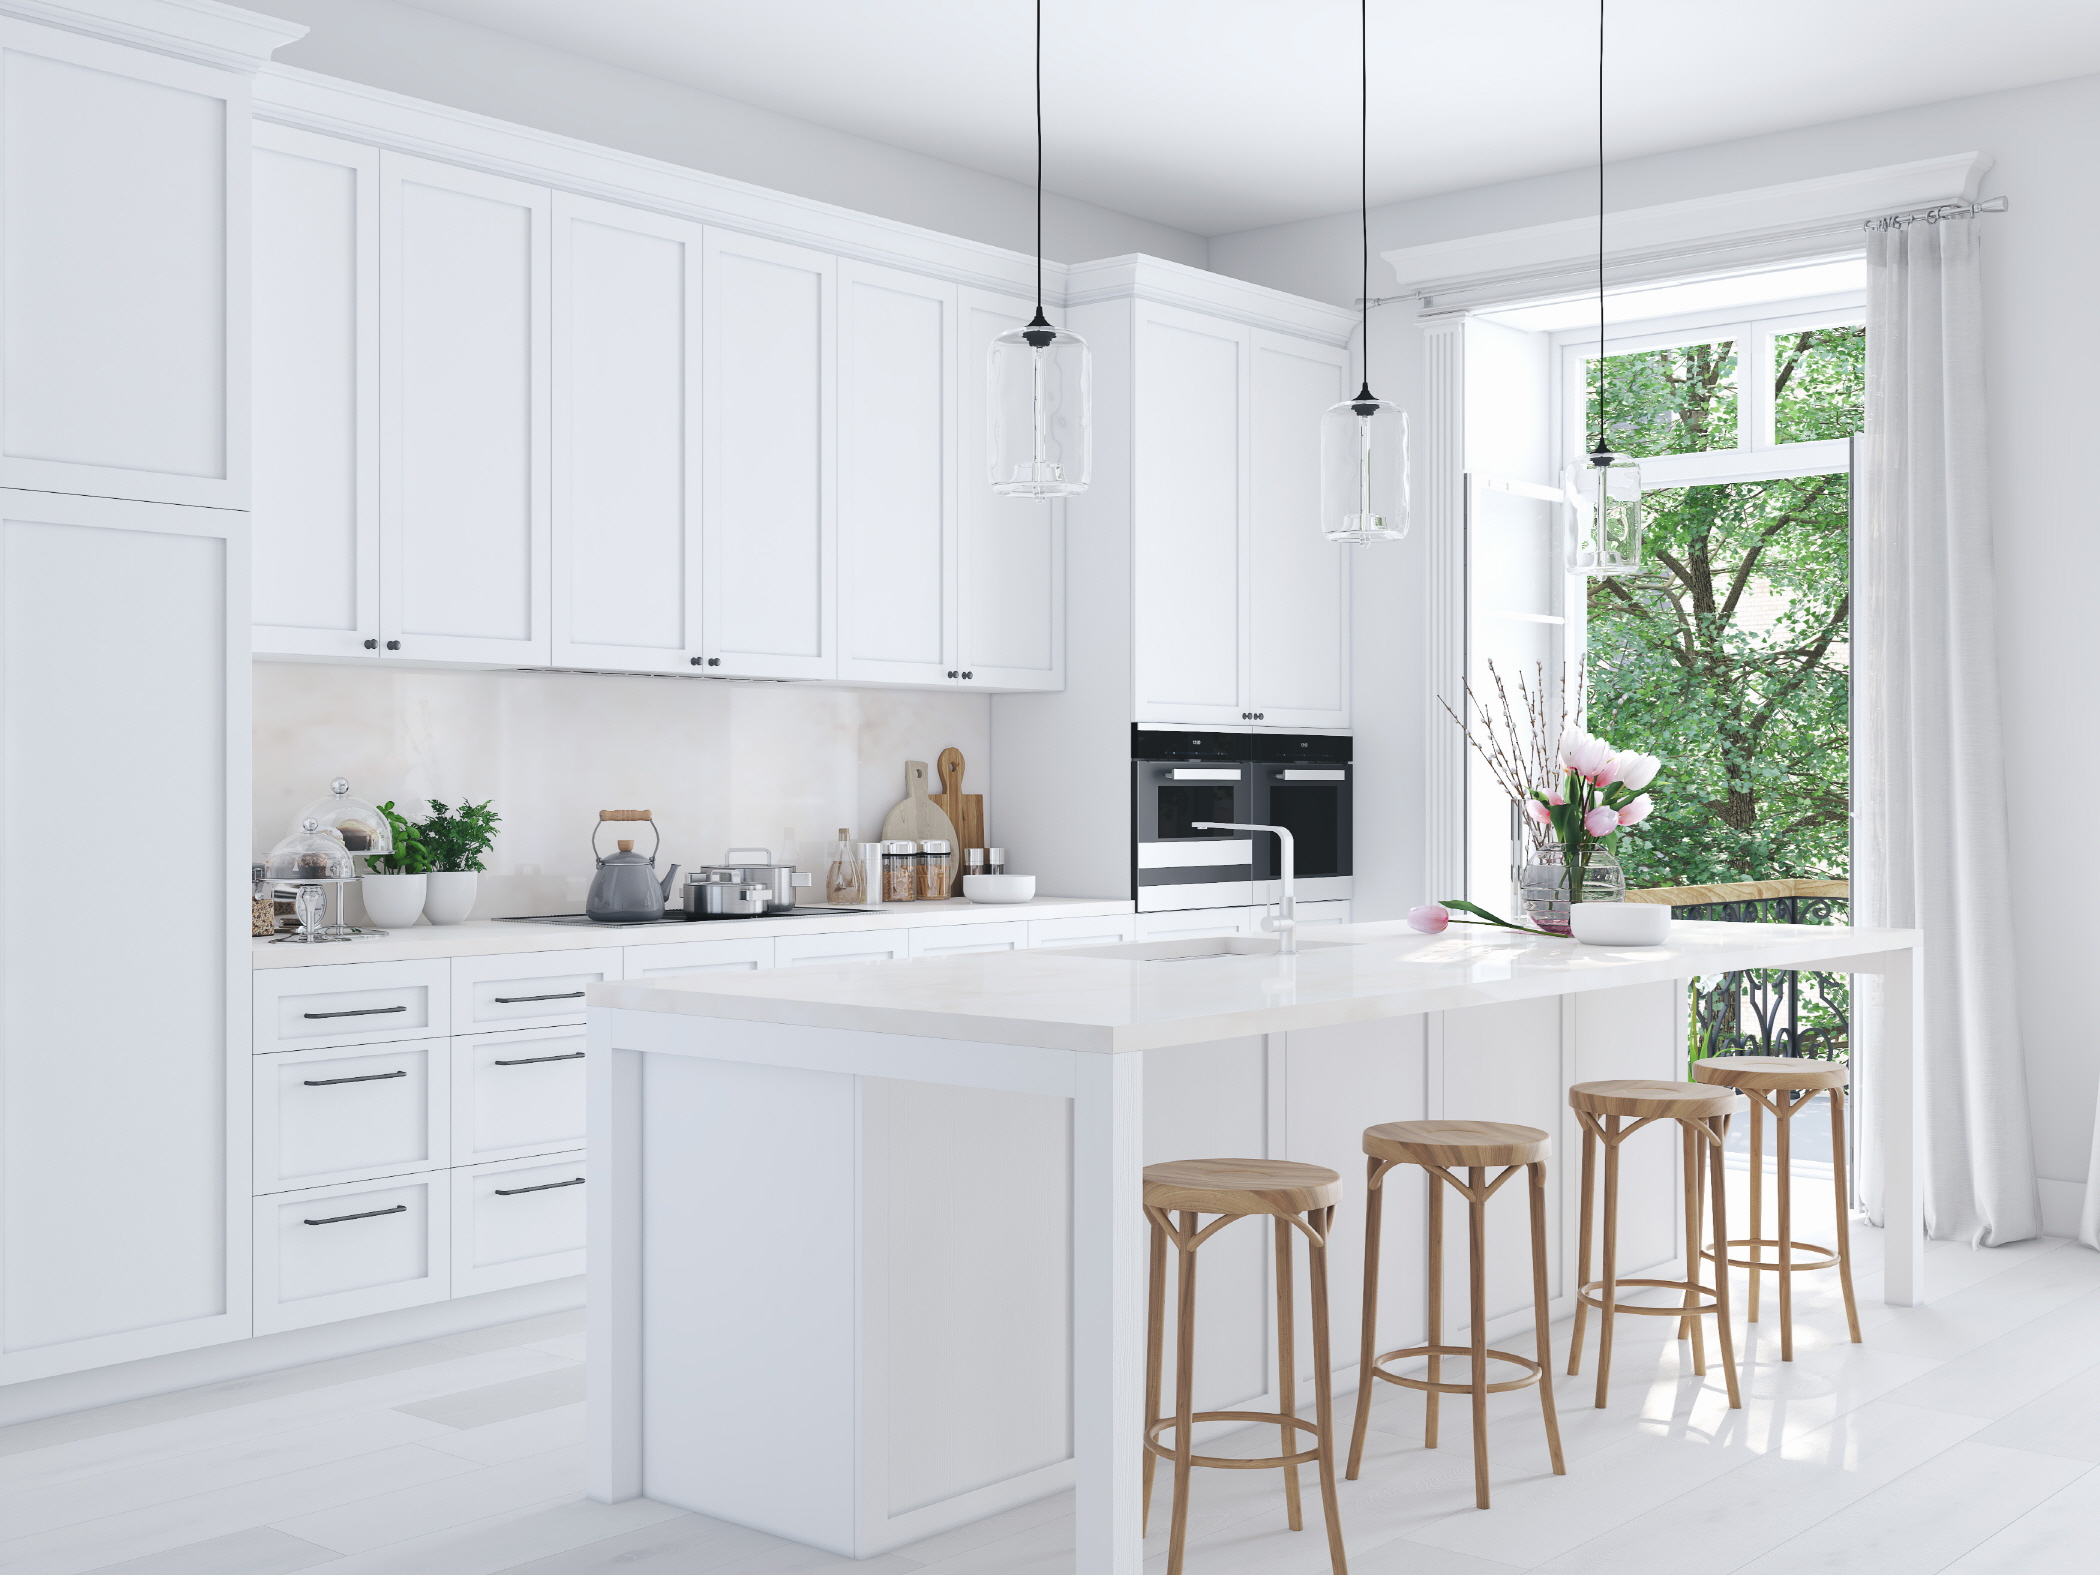 Explore budget-friendly elegance in a white kitchen with timeless sophistication.